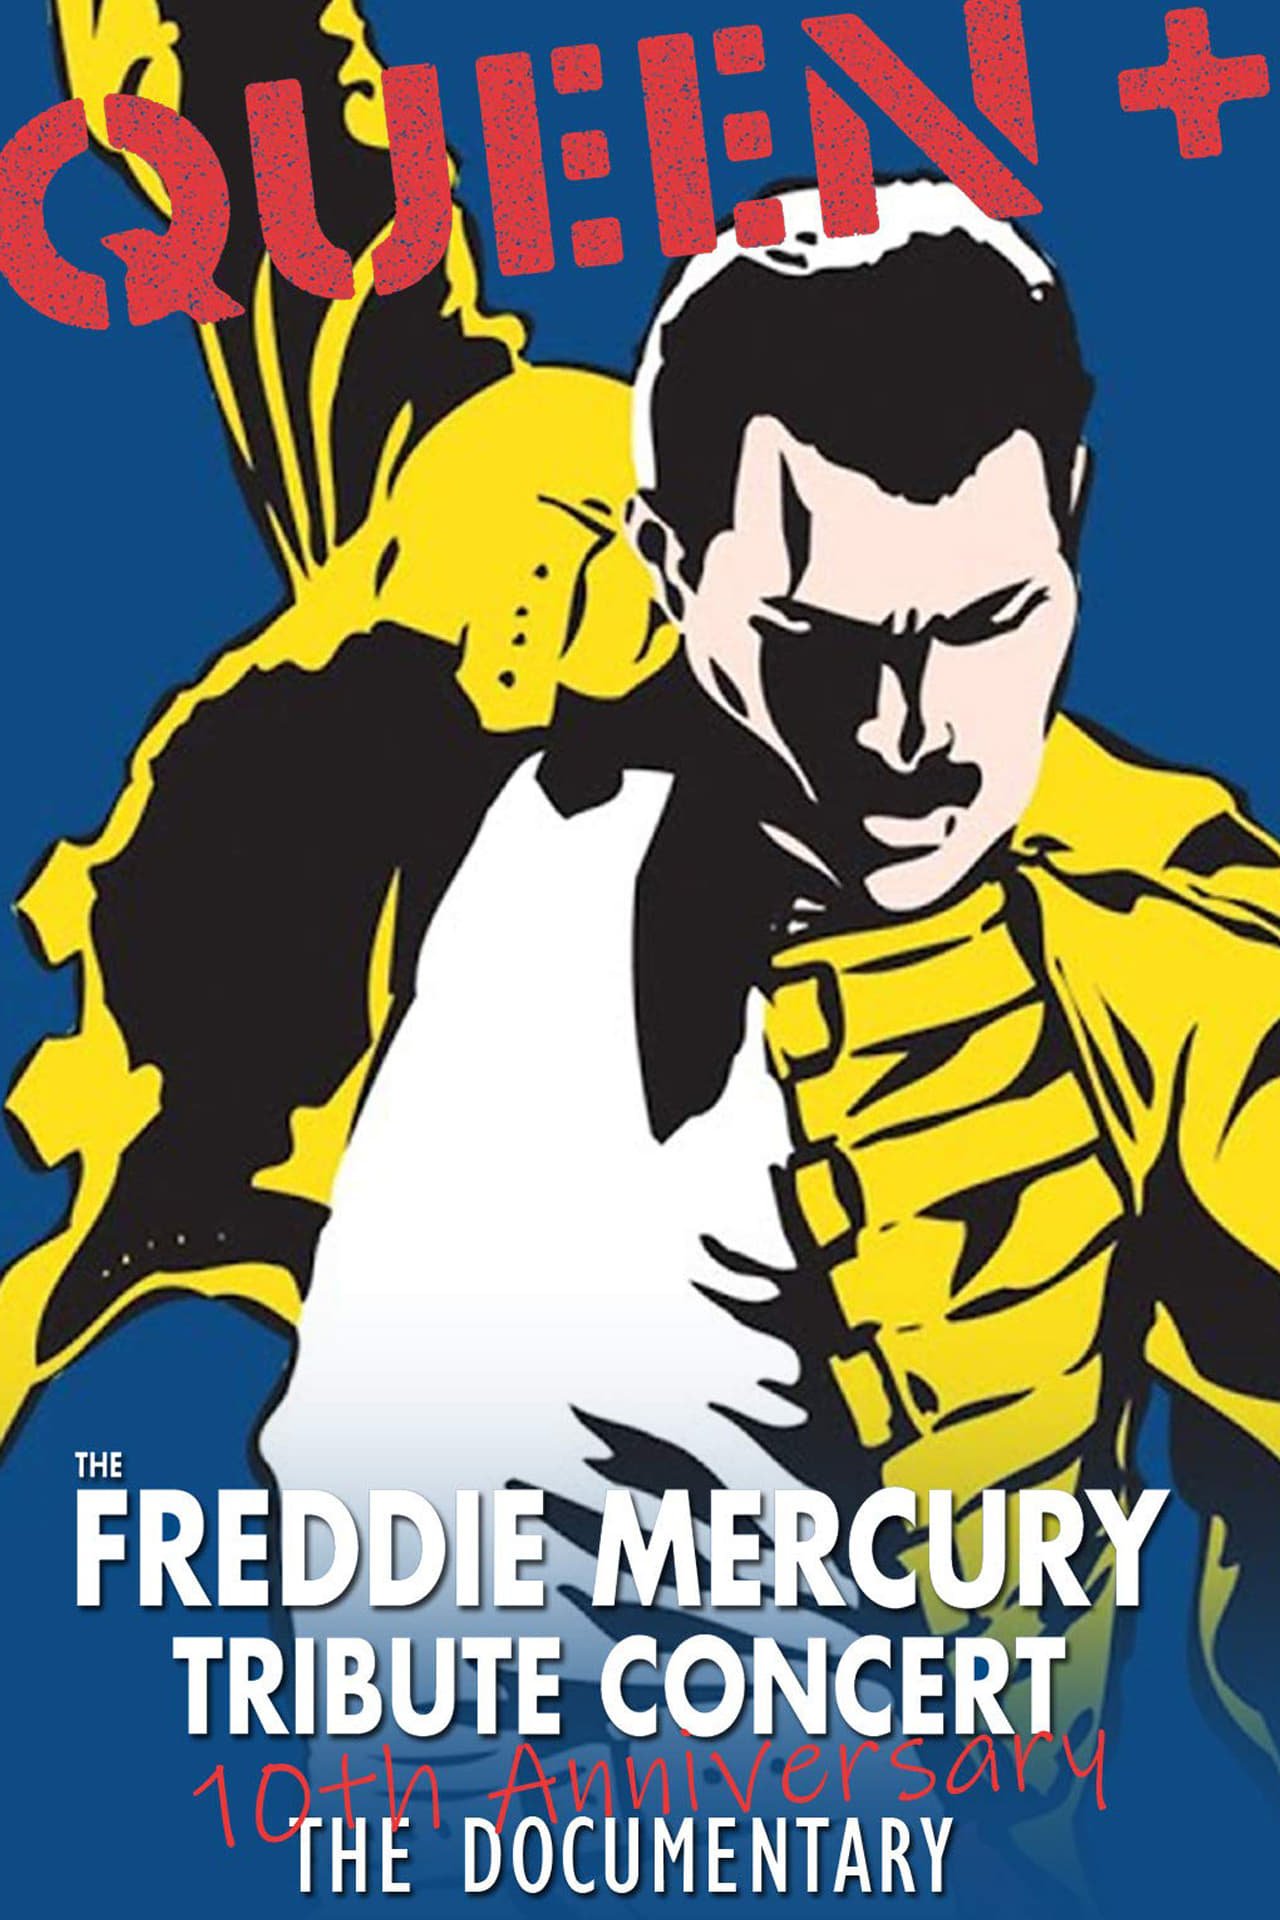 Queen - The Freddie Mercury Tribute Concert 10th Anniversary Documentary (2002)